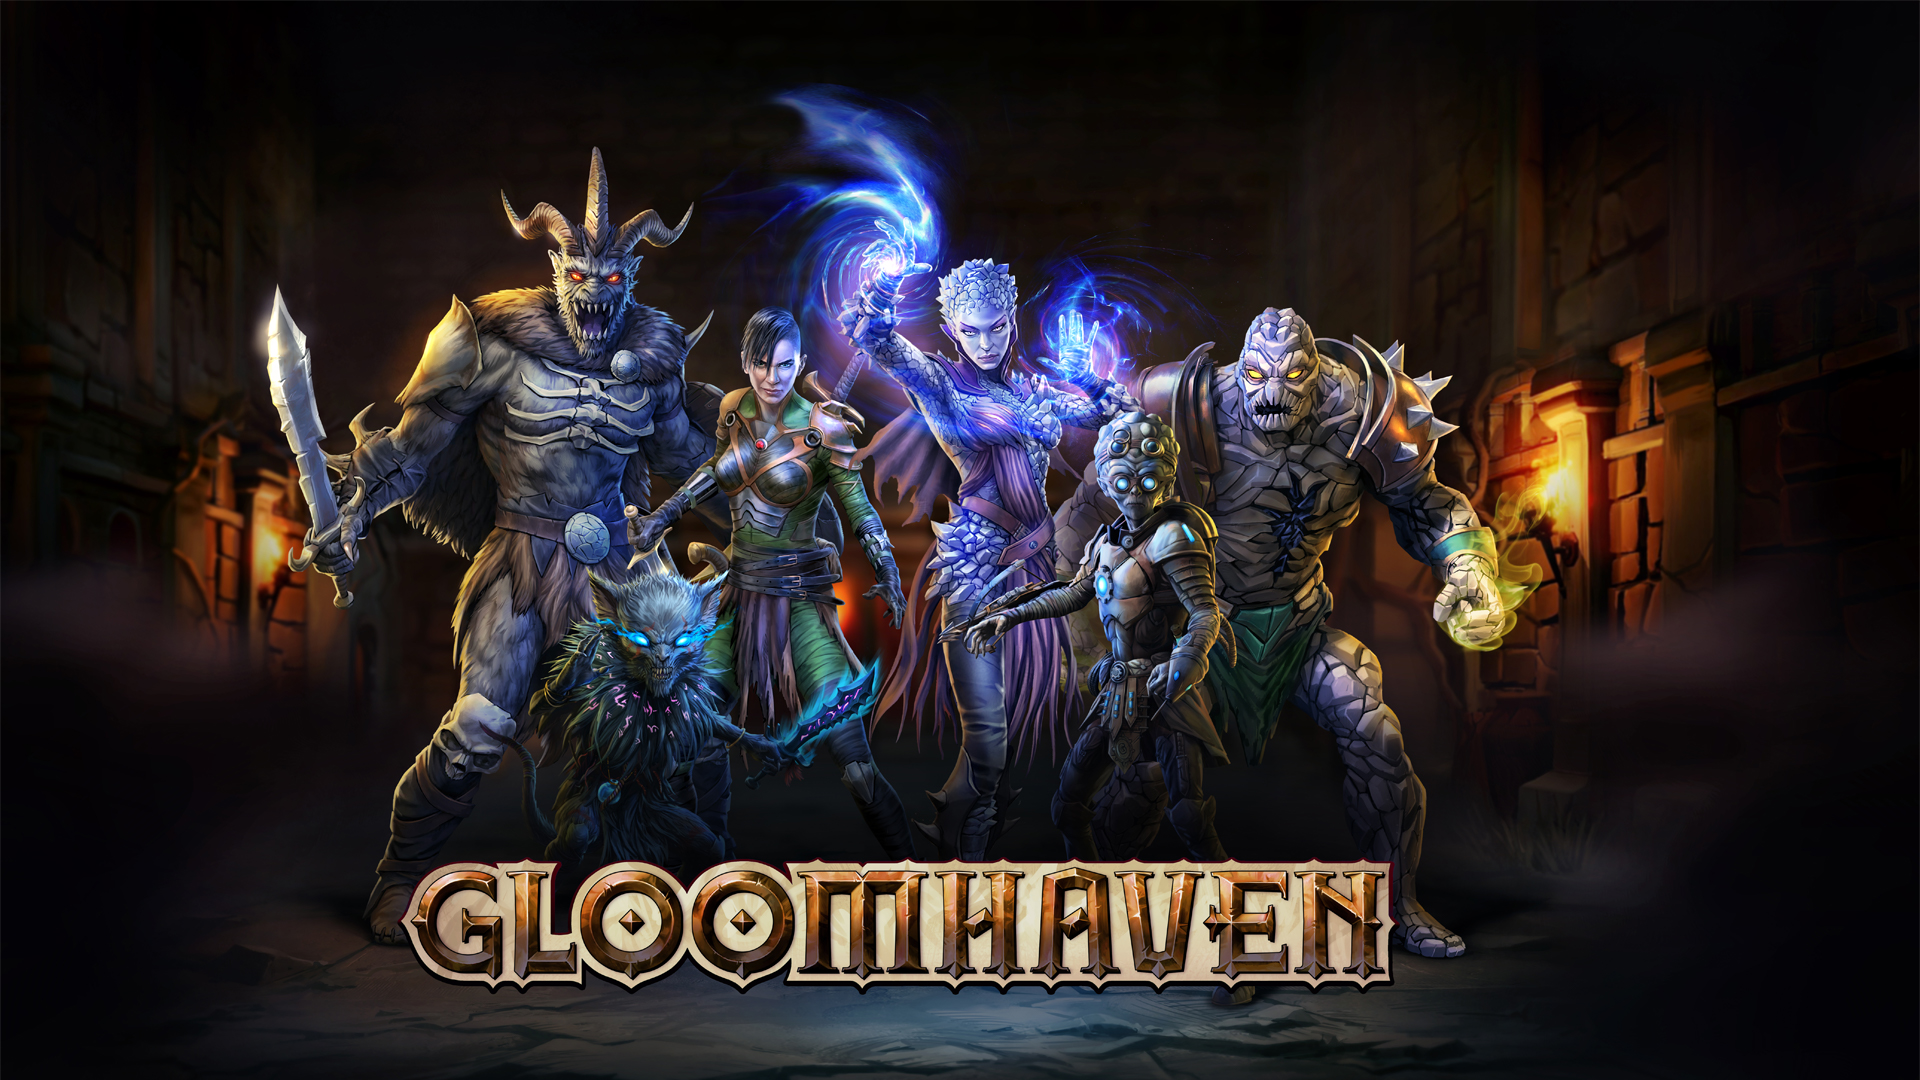 Turn-based tactical RPG Gloomhaven is now available on consoles